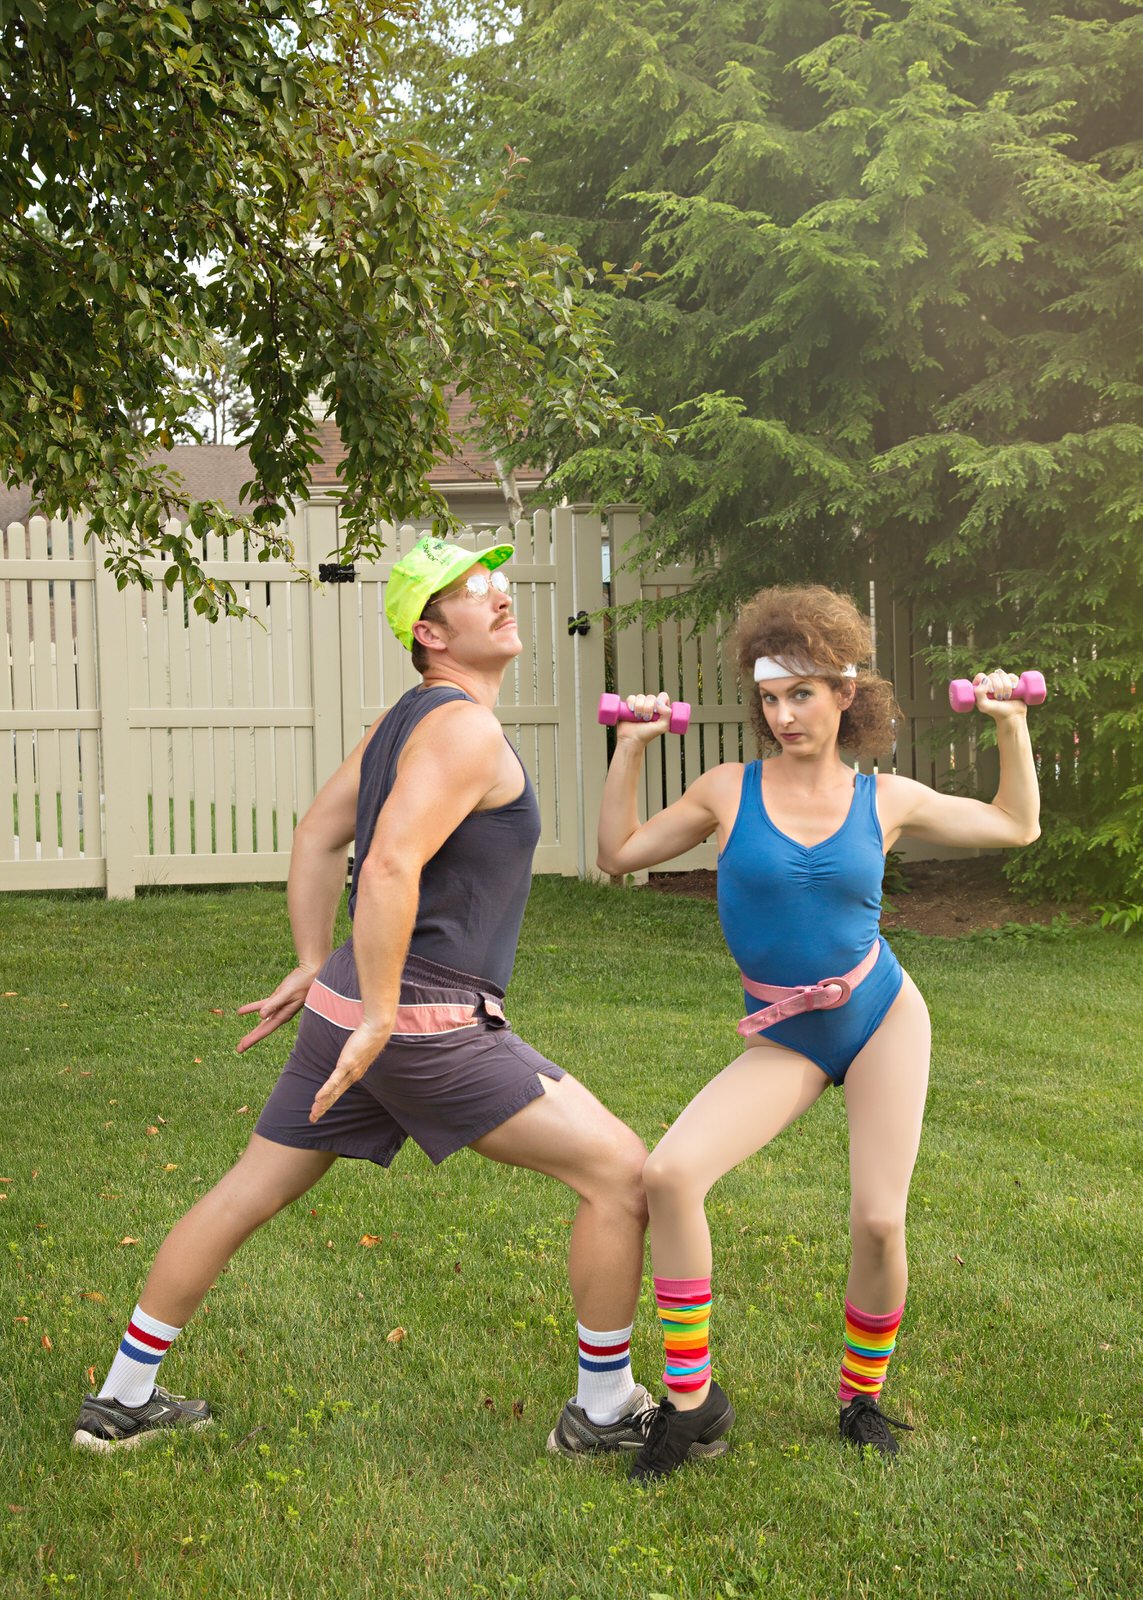 This Couple Did an '80s Themed Photo Shoot for Their 10th Anniversary.